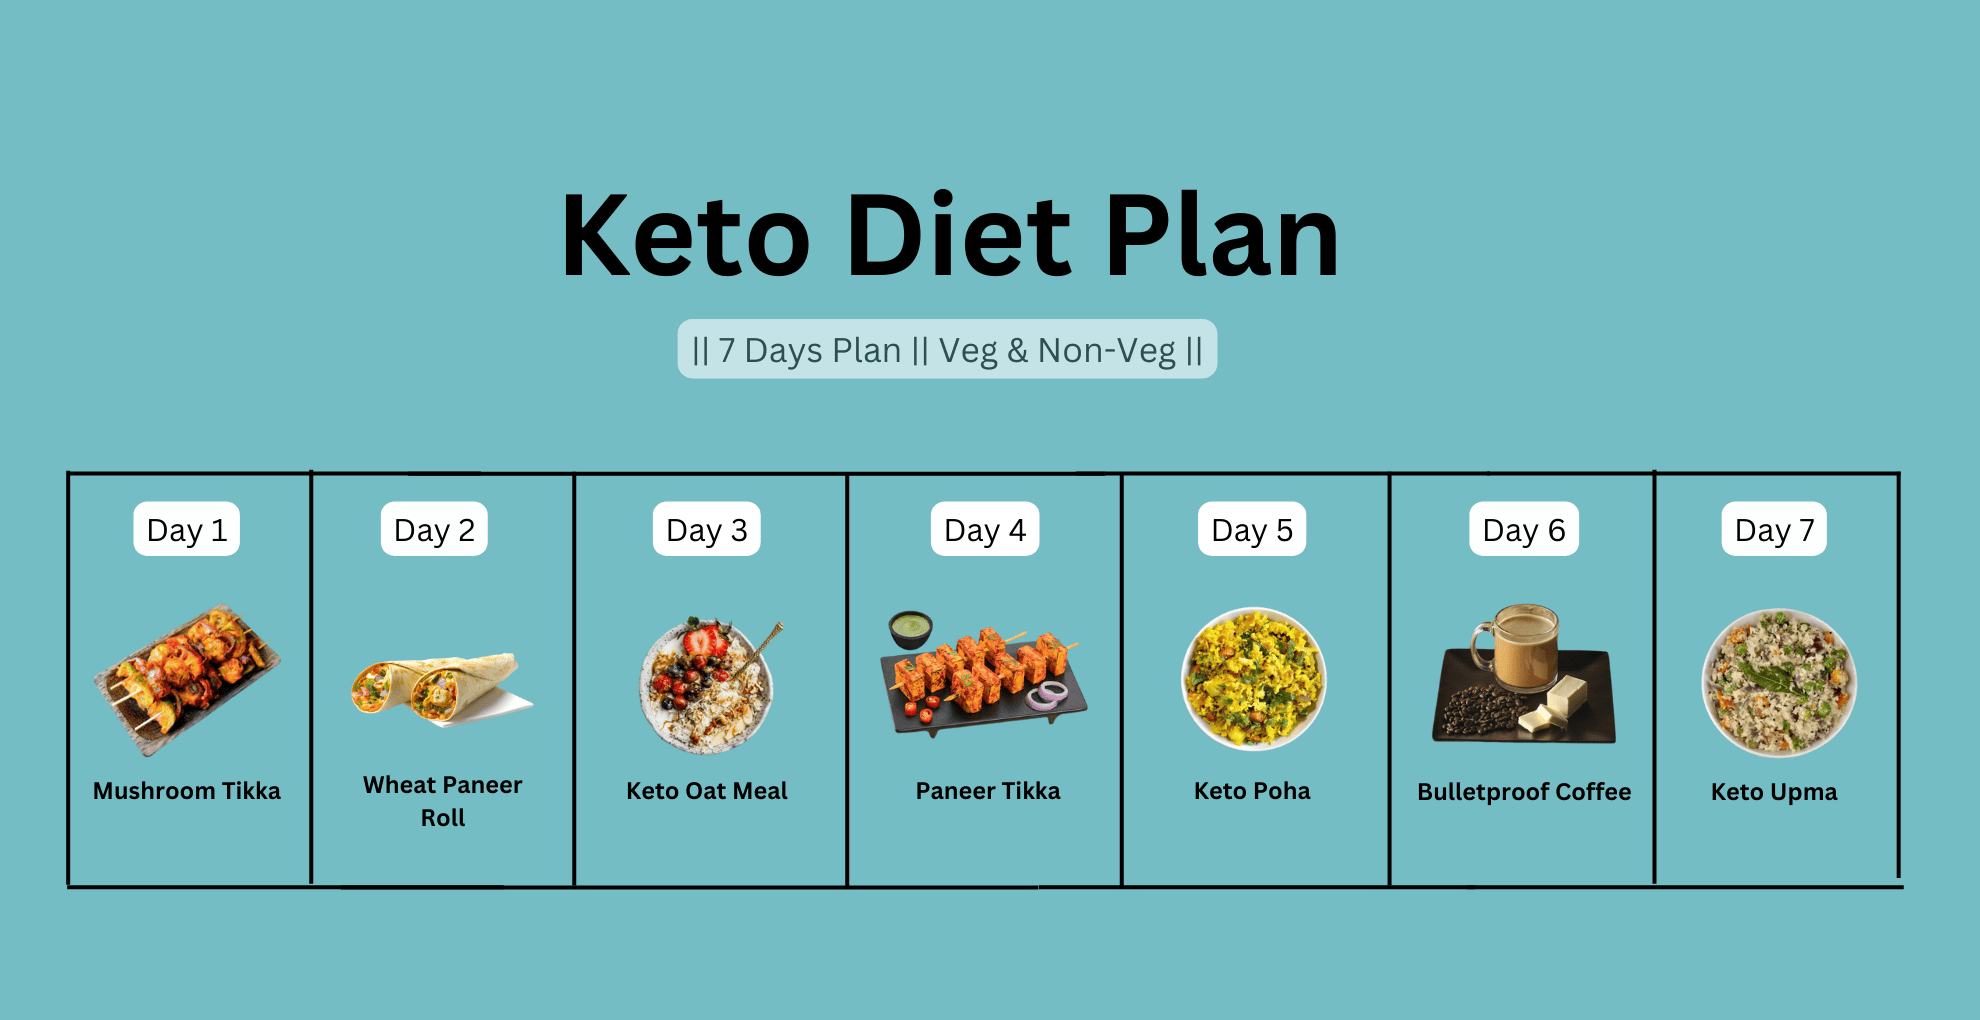 Low Carb Diet Meal Plan: Dietitians Share Foods To Eat And Tips